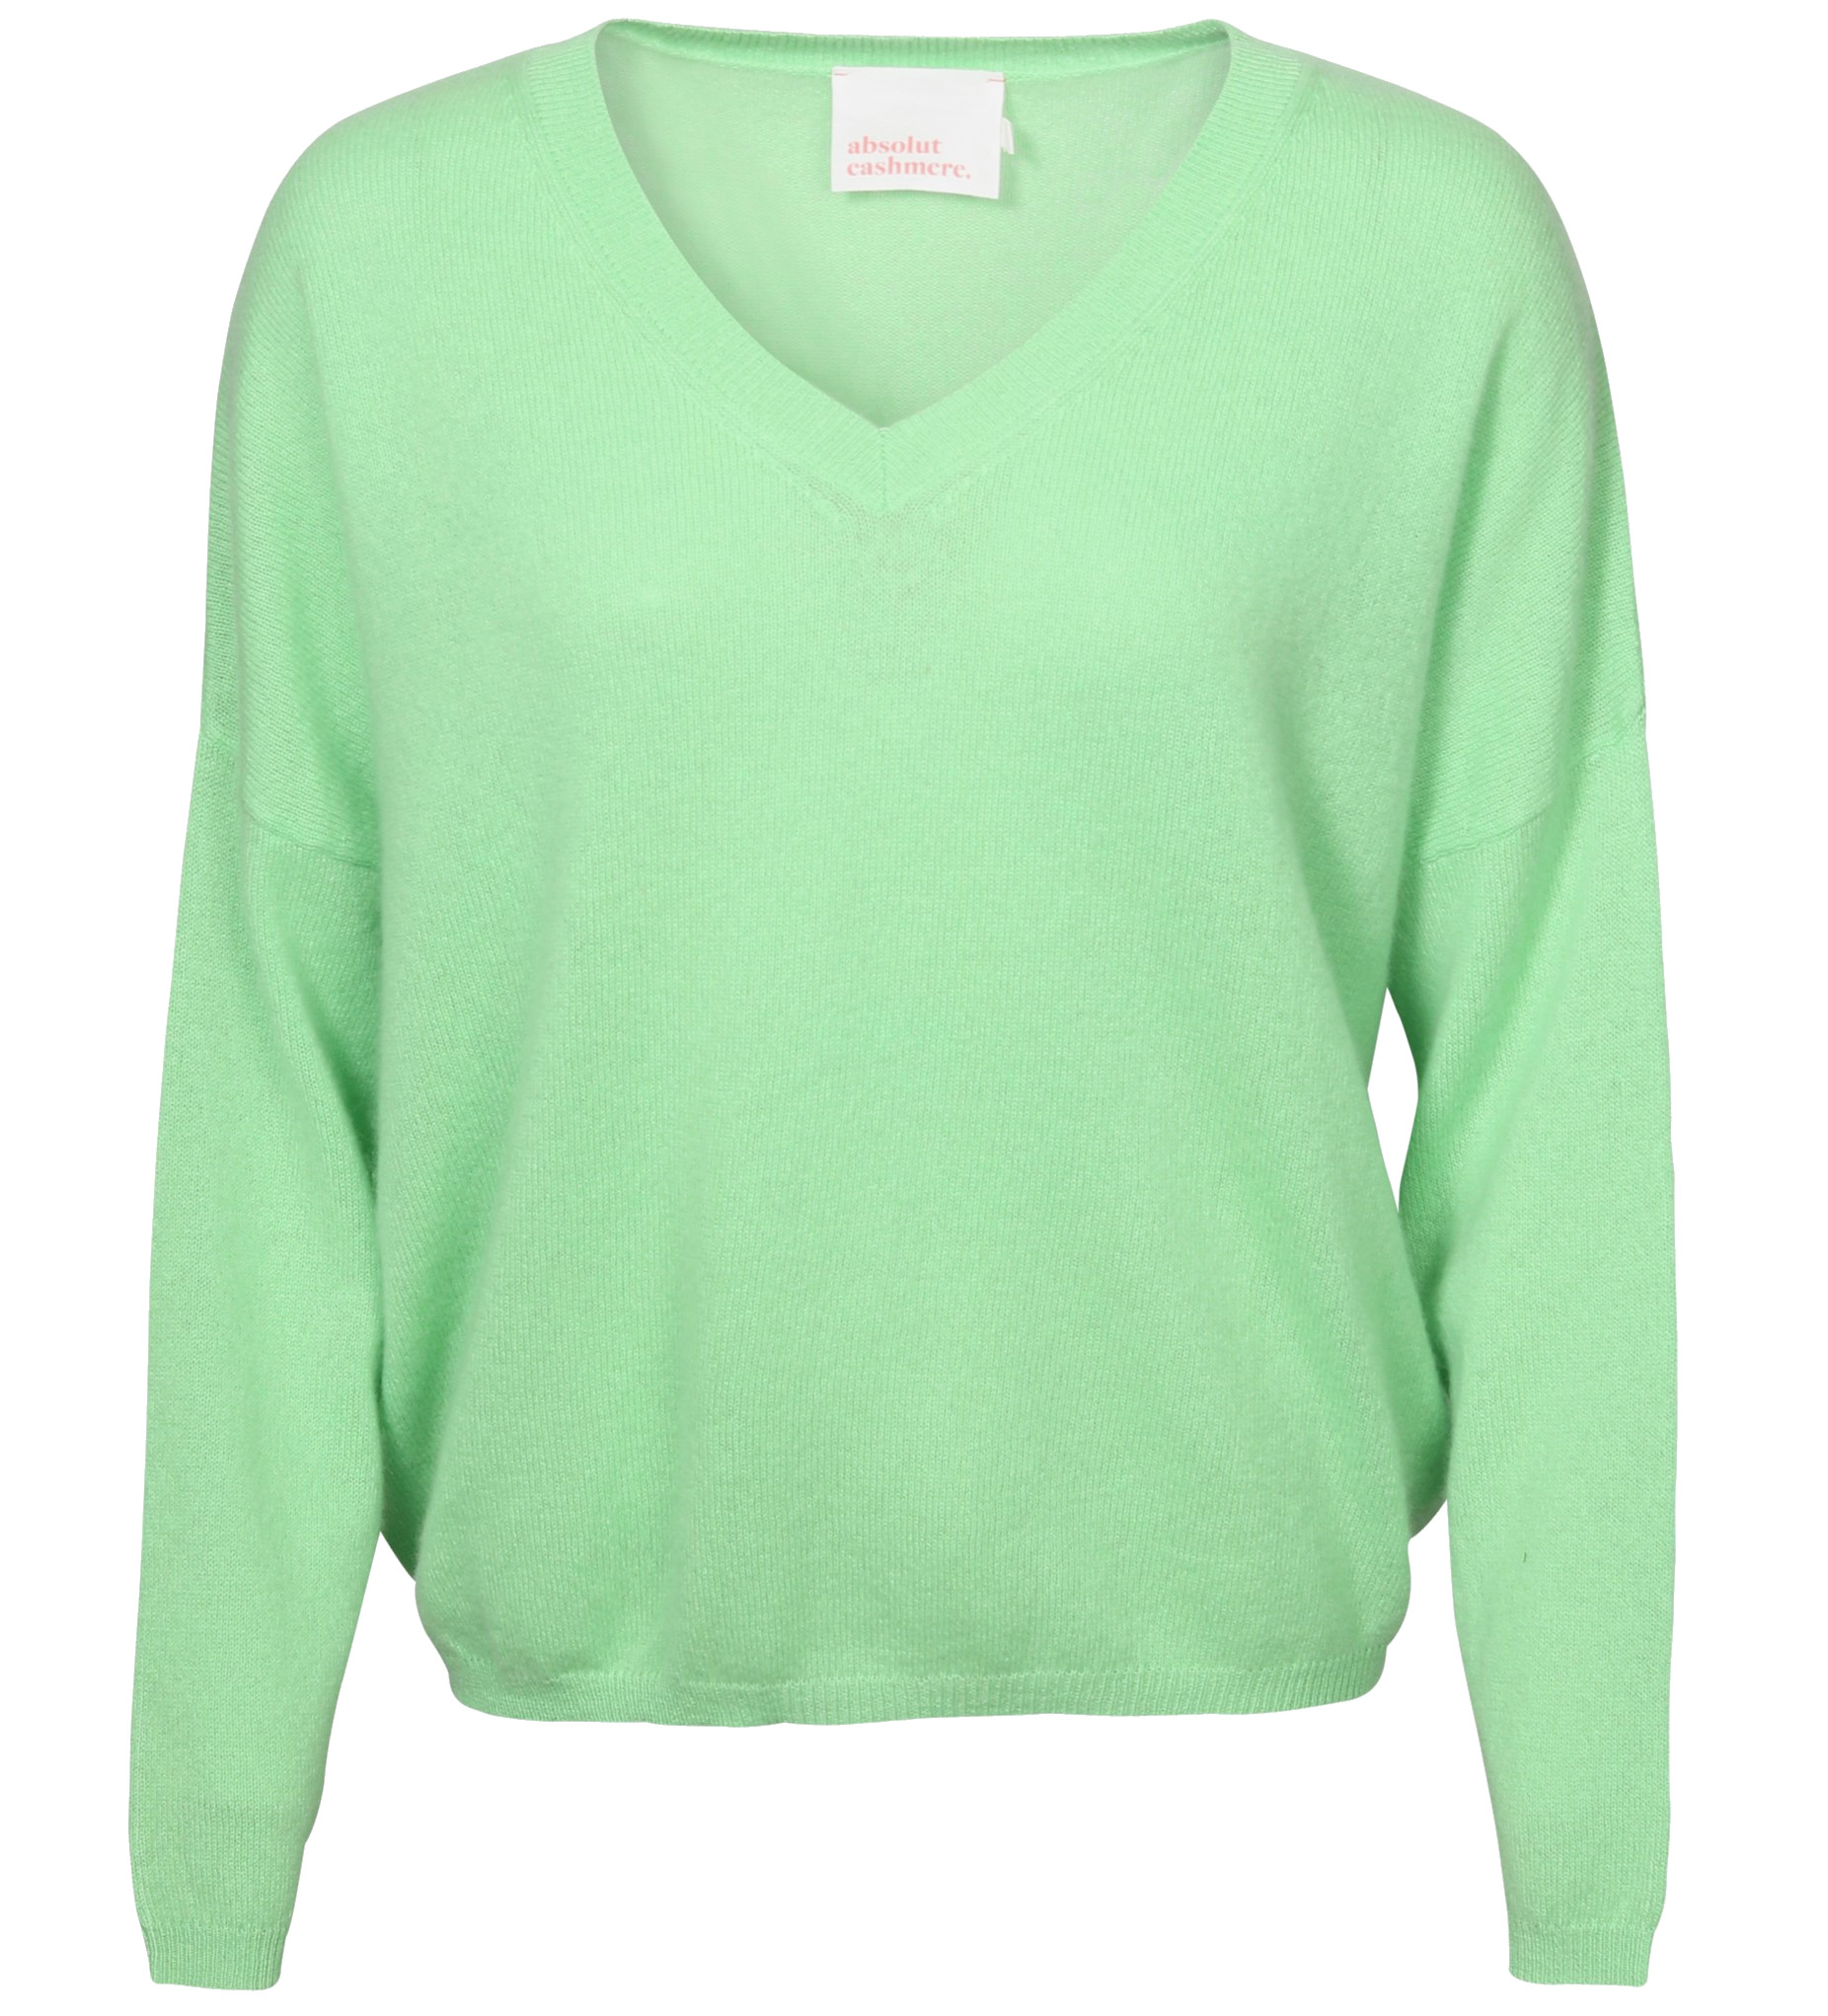 ABSOLUT CASHMERE V-Neck Sweater in Light Green